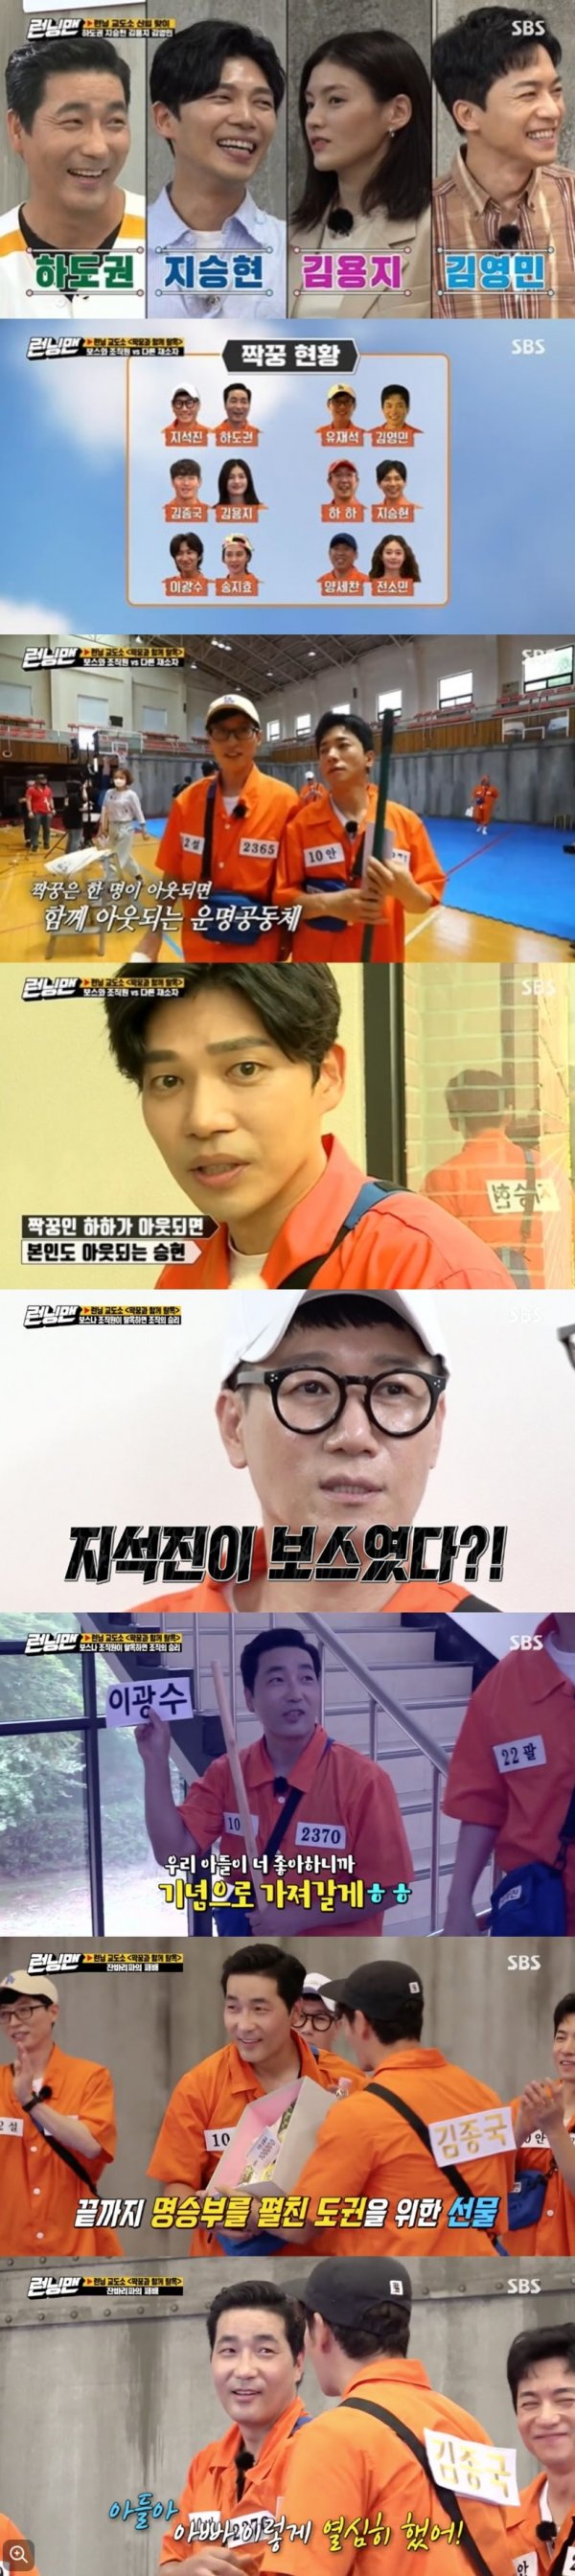 Kim Jong-kook and Ha Do-kwon have built up unusual friendships.On this day, Race was decorated with Running Prison Race, which features Actor Kim Yung-min, Ha Do-kwon, Ji Seung-hyun and Kim Yong-ji as new inmates.The members were given a mission to find a mate and escape before the time of the edification of hell, and the mate was able to grasp it using the characteristics of the same amount of money.The members performed two missions and grasped each others mates.The comedian Shin Jin-jin appeared as a prison officer and attracted attention, and the performance of the guests was shining.Ha Do-kwon laughed at Kim Jong-kook for I came to catch only one person, and Kim Yung-min laughed at Kim Jong-kook for his provision of the Republic of Kor, and Kim Yung-min pulled out the flow of Race by finding out the identity of Ji Suk-jin,Ji Suk-jin and Kim Yung-min took Kim Yung-mins name tag for escape, obtained the password, and headed for the escape gate, but Kim Jong-kook noticed it.Kim Jong-kook lured Ji Suk-jins line of defense, Ha Do-kwon, to tear off the name tag and even out his mate Ji Suk-jin.In the meantime, Ha Do-kwon, who tore his clothes, put a password paper into his mouth and suggested Kim Jong-kook to share the product.Kim Jong-kook and Kim Yong-ji succeeded in escaping from prison with less than a minute left after the mission ended and won the final.Kim Jong-kook said, We decided to give the product to Ha Do-kwon. Please bring it to the children.The scene was the best TV viewer ratings per minute with 8.6%.Ha Do-kwon Ive Got One: Professional Government of the Republic of Kim Jong-kook Victory to Kim Jong-kook, Commodity delivered as a gift to Ha Do-kwon